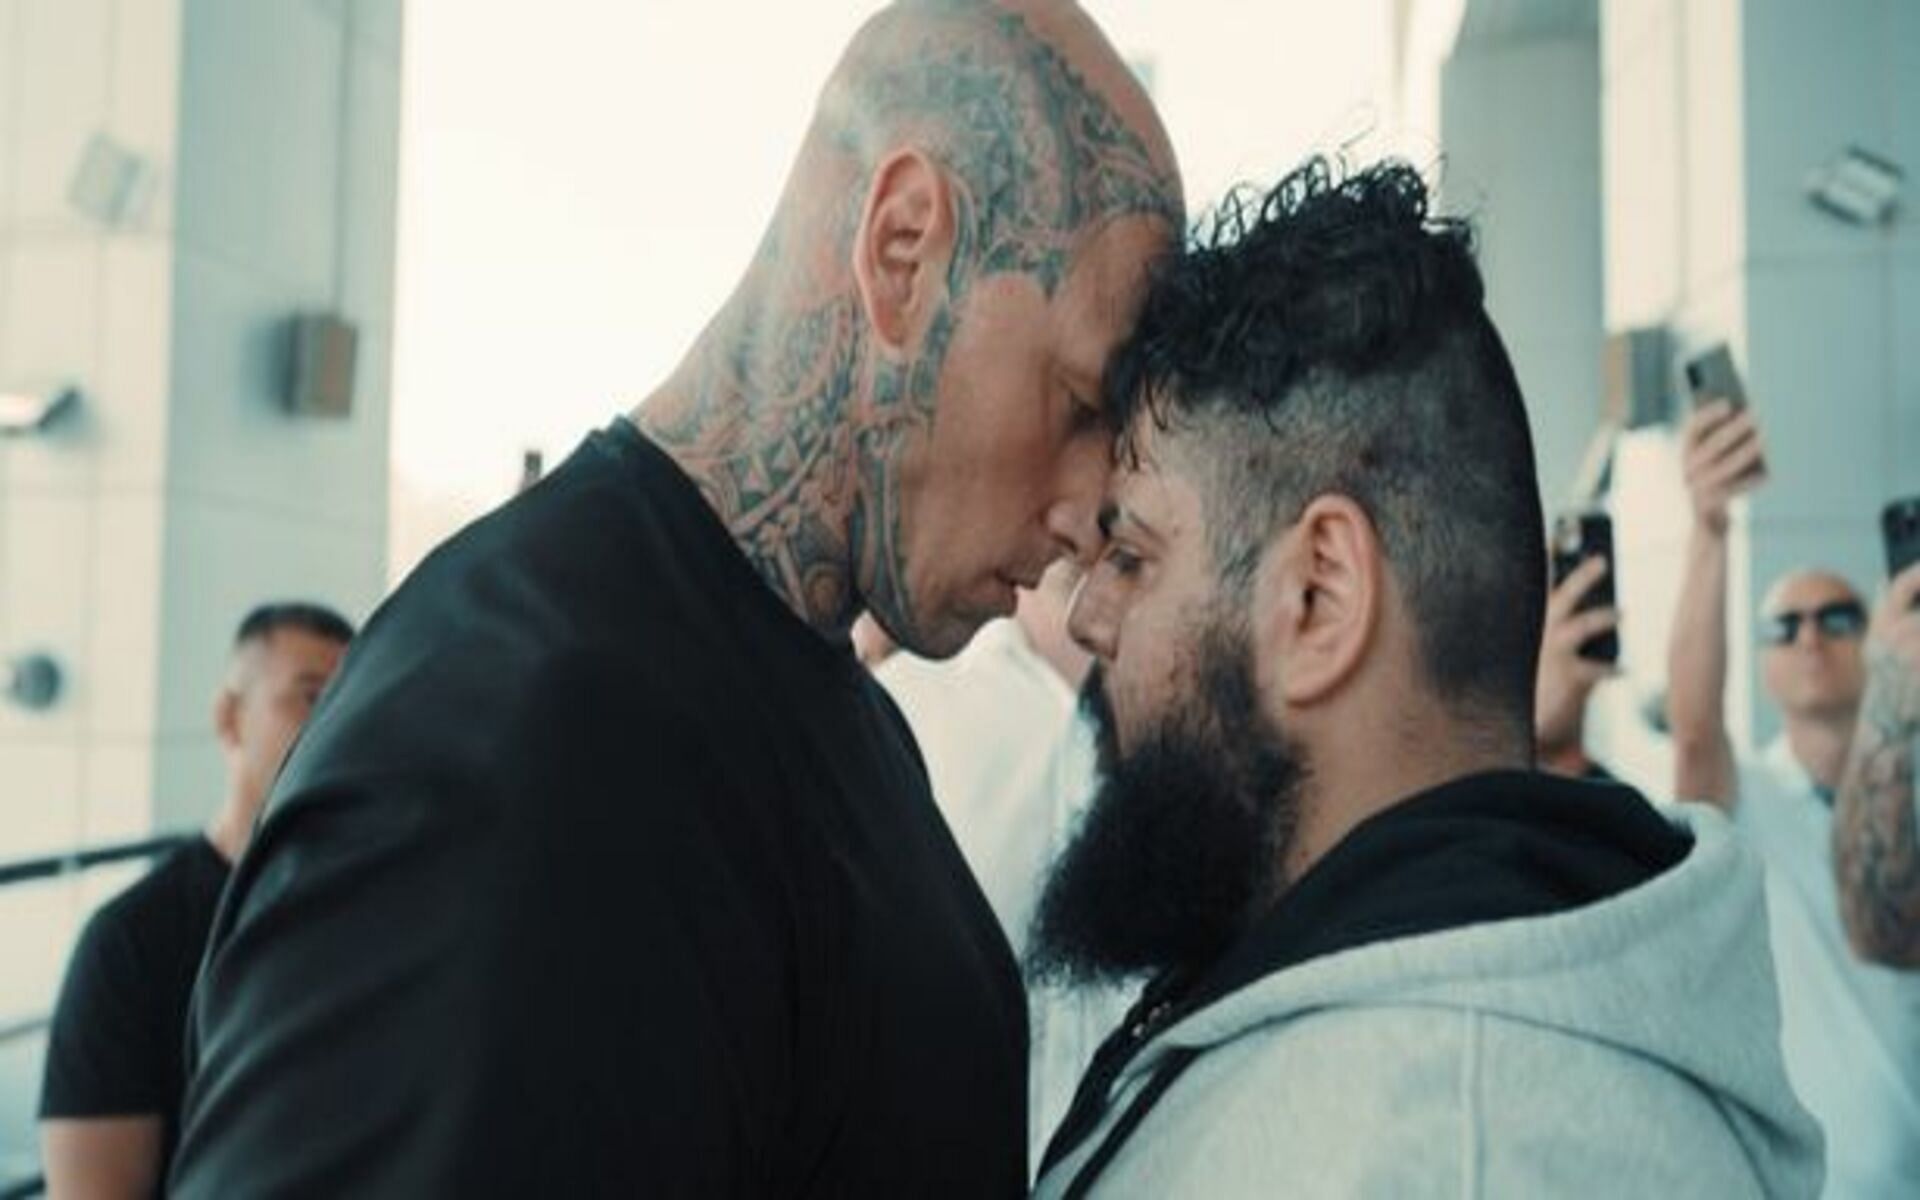 The showdown between Martyn Ford (L) and the Iranian Hulk (R) has been halted once again.